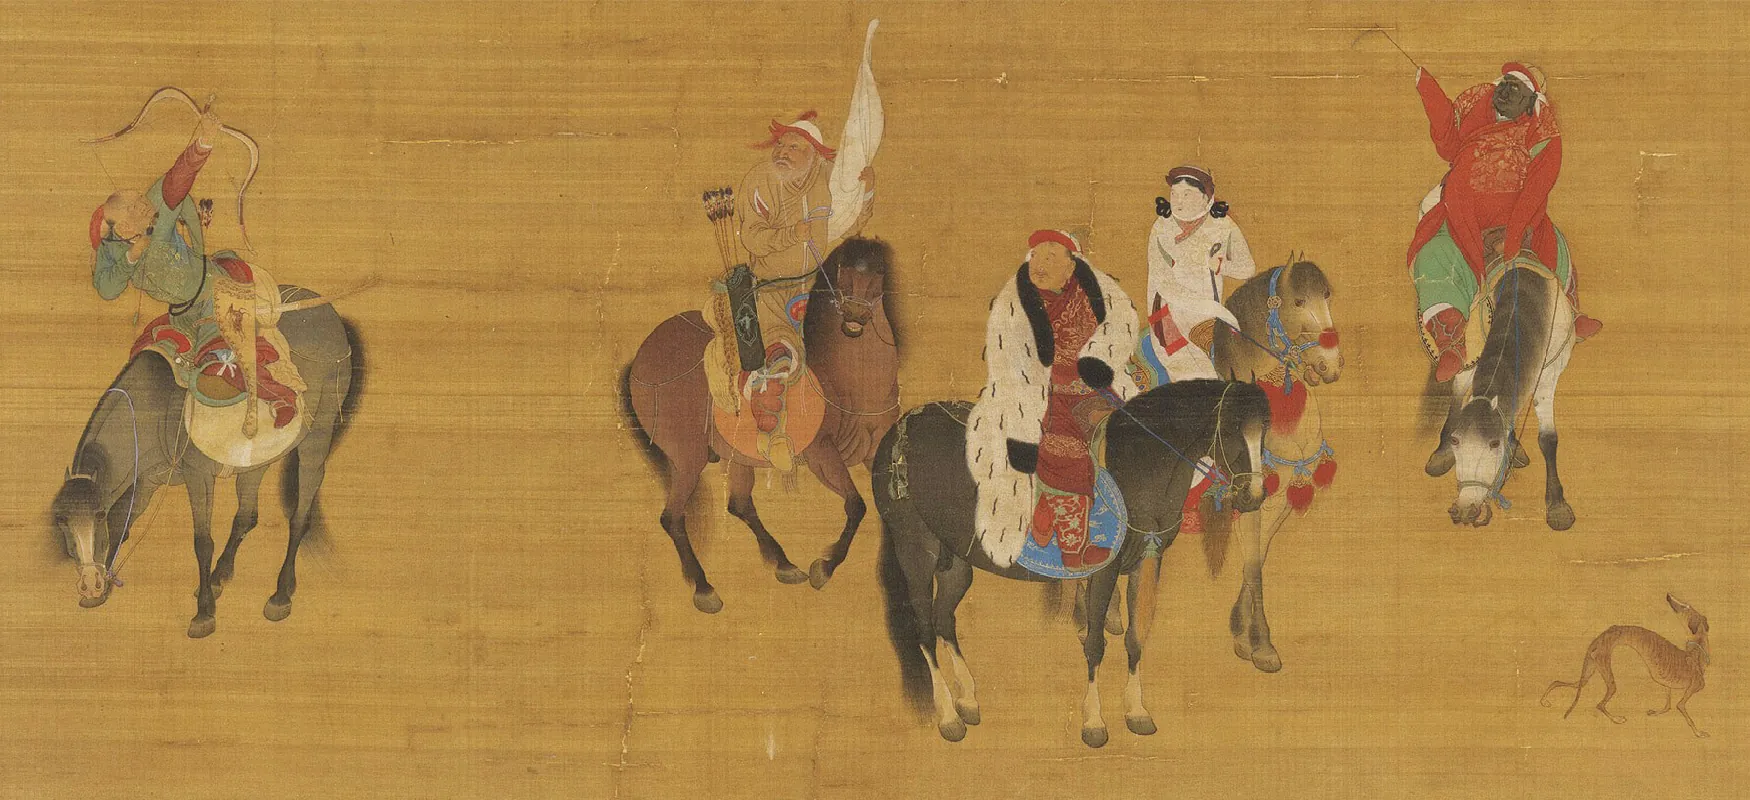 An image painted on a lightly striped mustard yellow background is shown. Cracks run throughout the image. Five people are shown sitting on horses and a small, thin, brown dog is shown in the right foreground corner looking at the people. At the left, a figure on a light black horse looks up at the sky, aiming a bow and arrow up. He wears a light blue long robe over a red long sleeved shirt and red stockings. His shoes are red and a beige and brown decorated arrow sheath hangs at his left side as well as a light brown sword sheath. His hair is pulled into a tight ponytail at the top of his head and encased in a red cloth. In the middle, three figures sit on horses looking at the figure at the left. The first figure wears a long beige robe with brown and beige boots and a white cap with red projections on three sides and a red topper. He holds a white flag rolled up on a pole and holds the reins of the horse tightly. He has a white beard, thick cheeks, a black and blue sheath of arrows at his right side, and sits atop a brown horse with its teeth baring. The figure in the middle of this group wears a long, thick white coat with black wavy dashes all over and a thick black collar and black trim over a maroon highly decorated robe. He has a round face, tiny facial features that are barely visible, wears a red and white cap and sits atop a black horse with a decorated blue saddle. The third figure in this group has a very pale face, tiny black eyes and red lips, and black hair in pigtails under a brown flat hat. They wear a white robe and sit atop a brown horse with decorative blue reins and red heart tassels on their snout and hanging from the reins. A figure in the right corner is a large dark skinned person sitting atop a gray and white horse. The horse looks down while the figure holds on to the reins. He is dressed in a gold decorated red robe, green undershirt, red boots, and red and beige hat. His face shows thick cheeks, white eyes, and a large nose. He holds a whip in his right hand in the air.